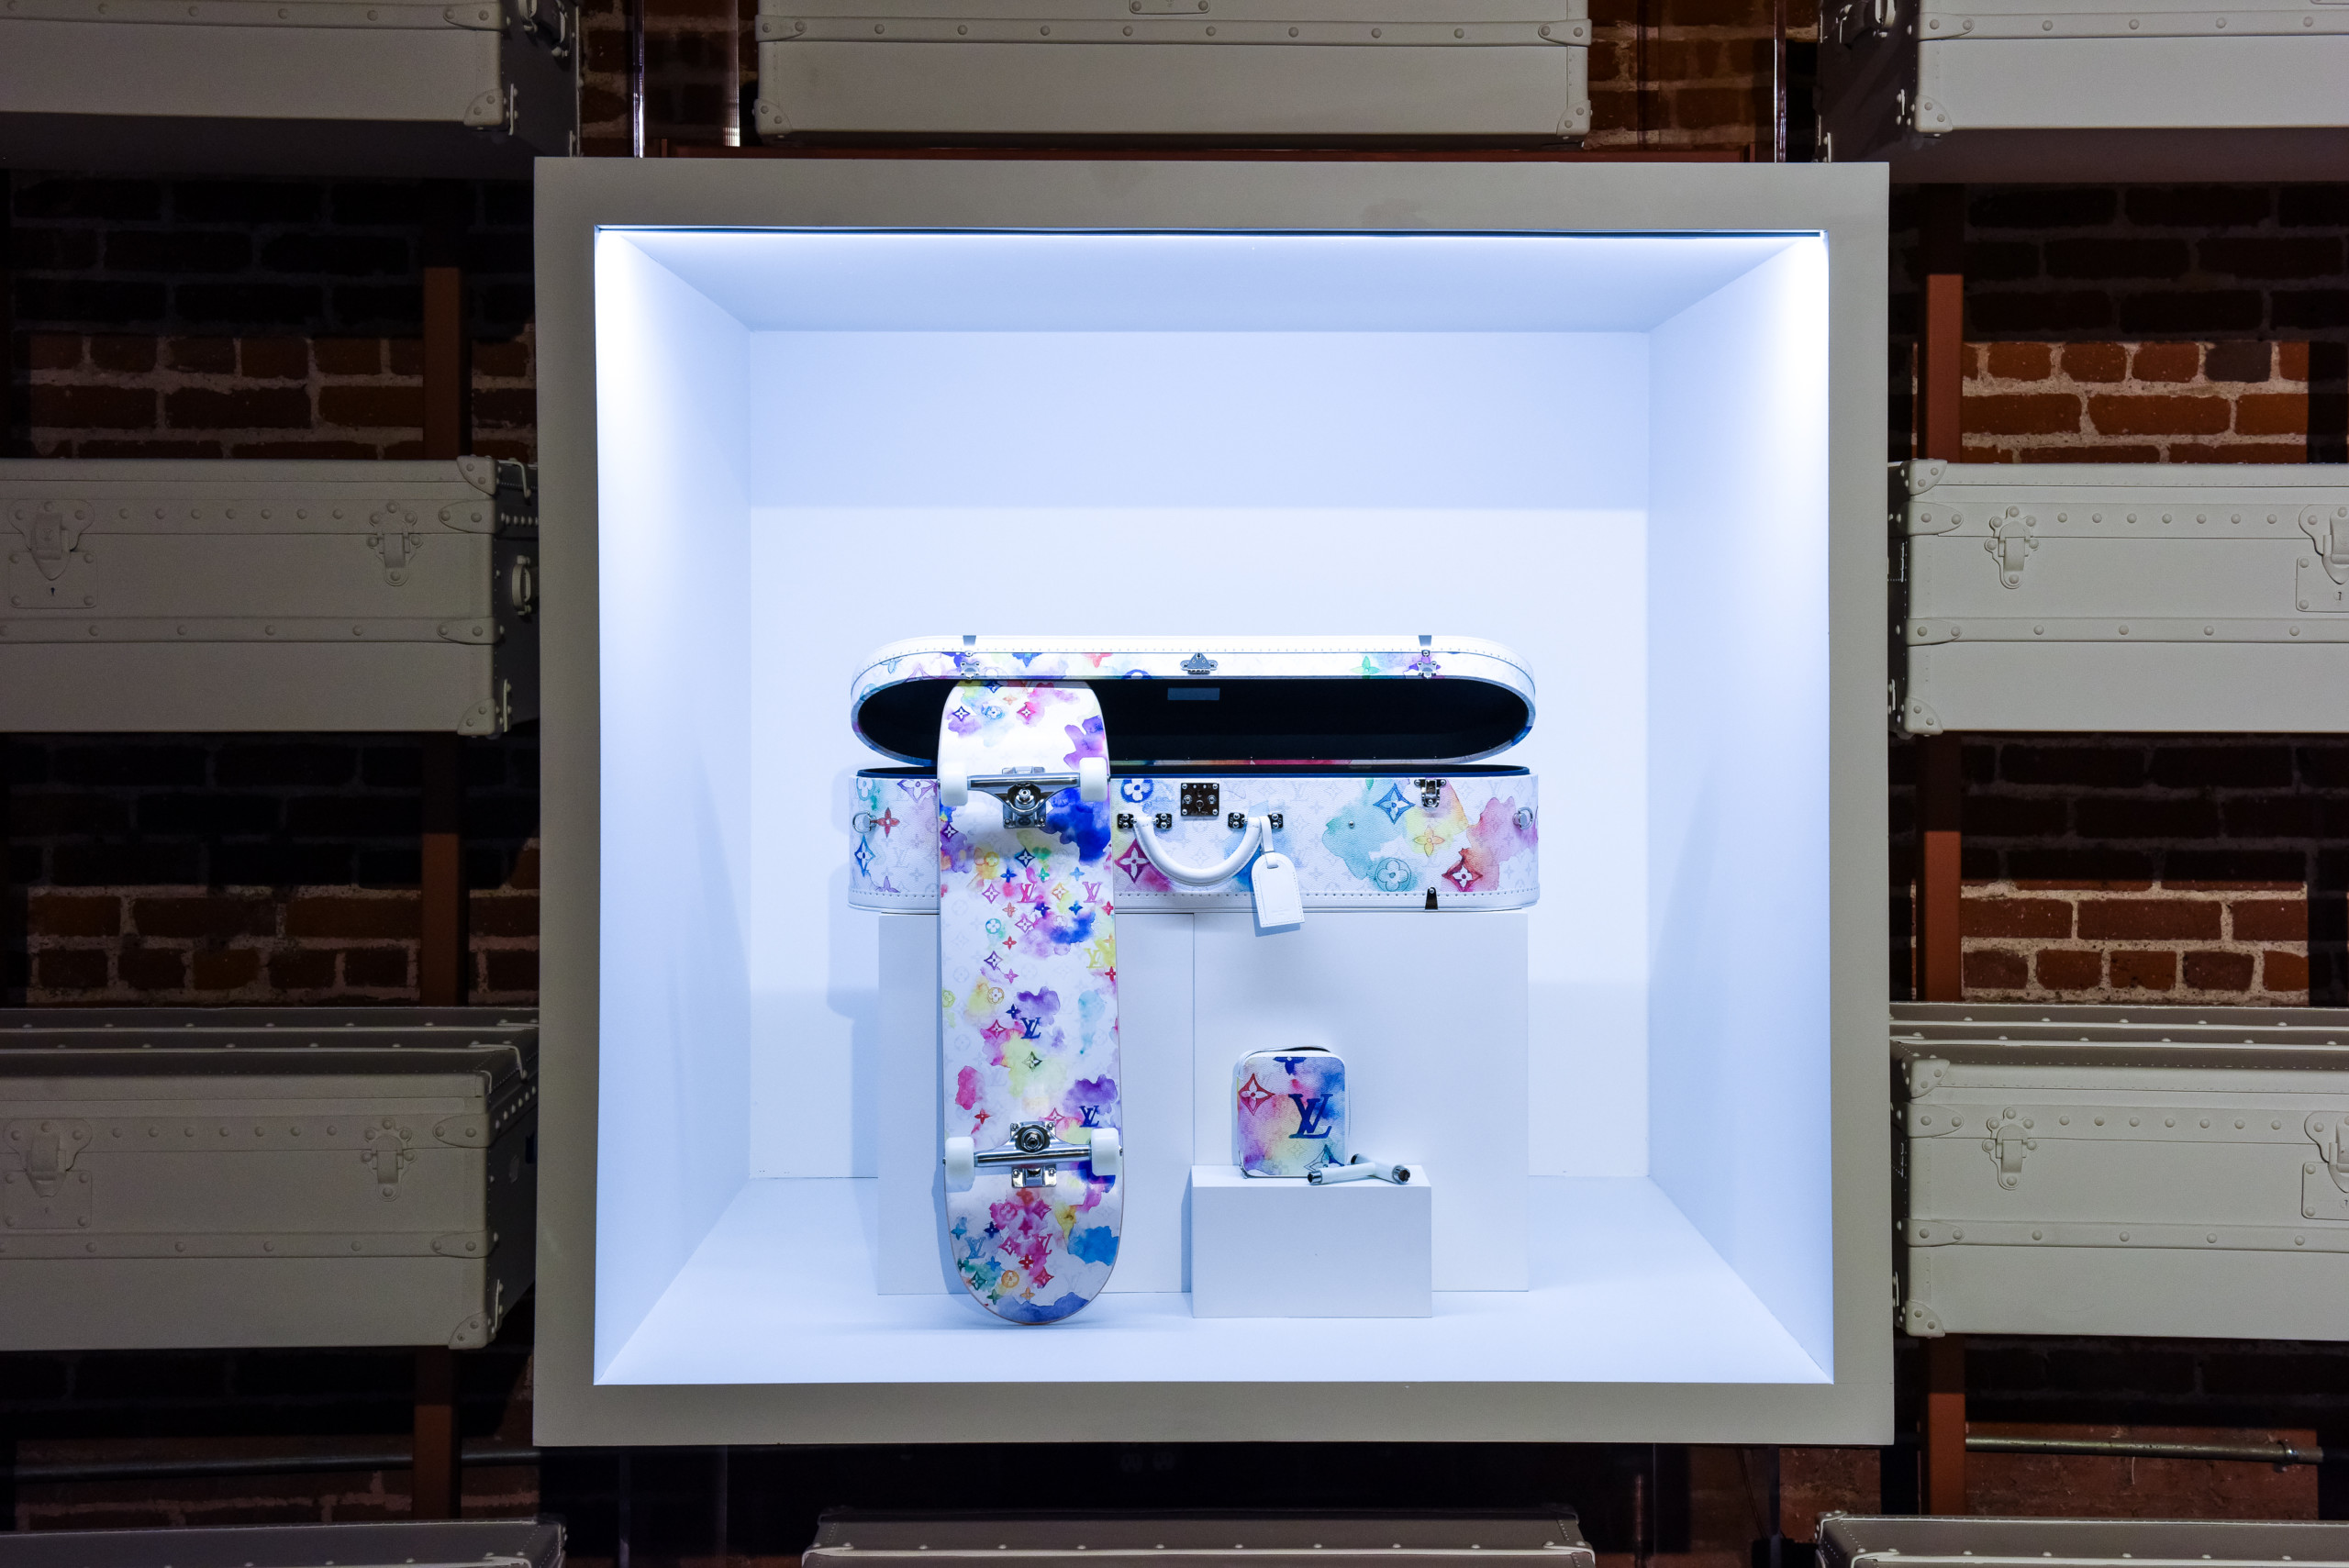 Louis Vuitton Debuts Augmented Reality Experience in Manhattan 